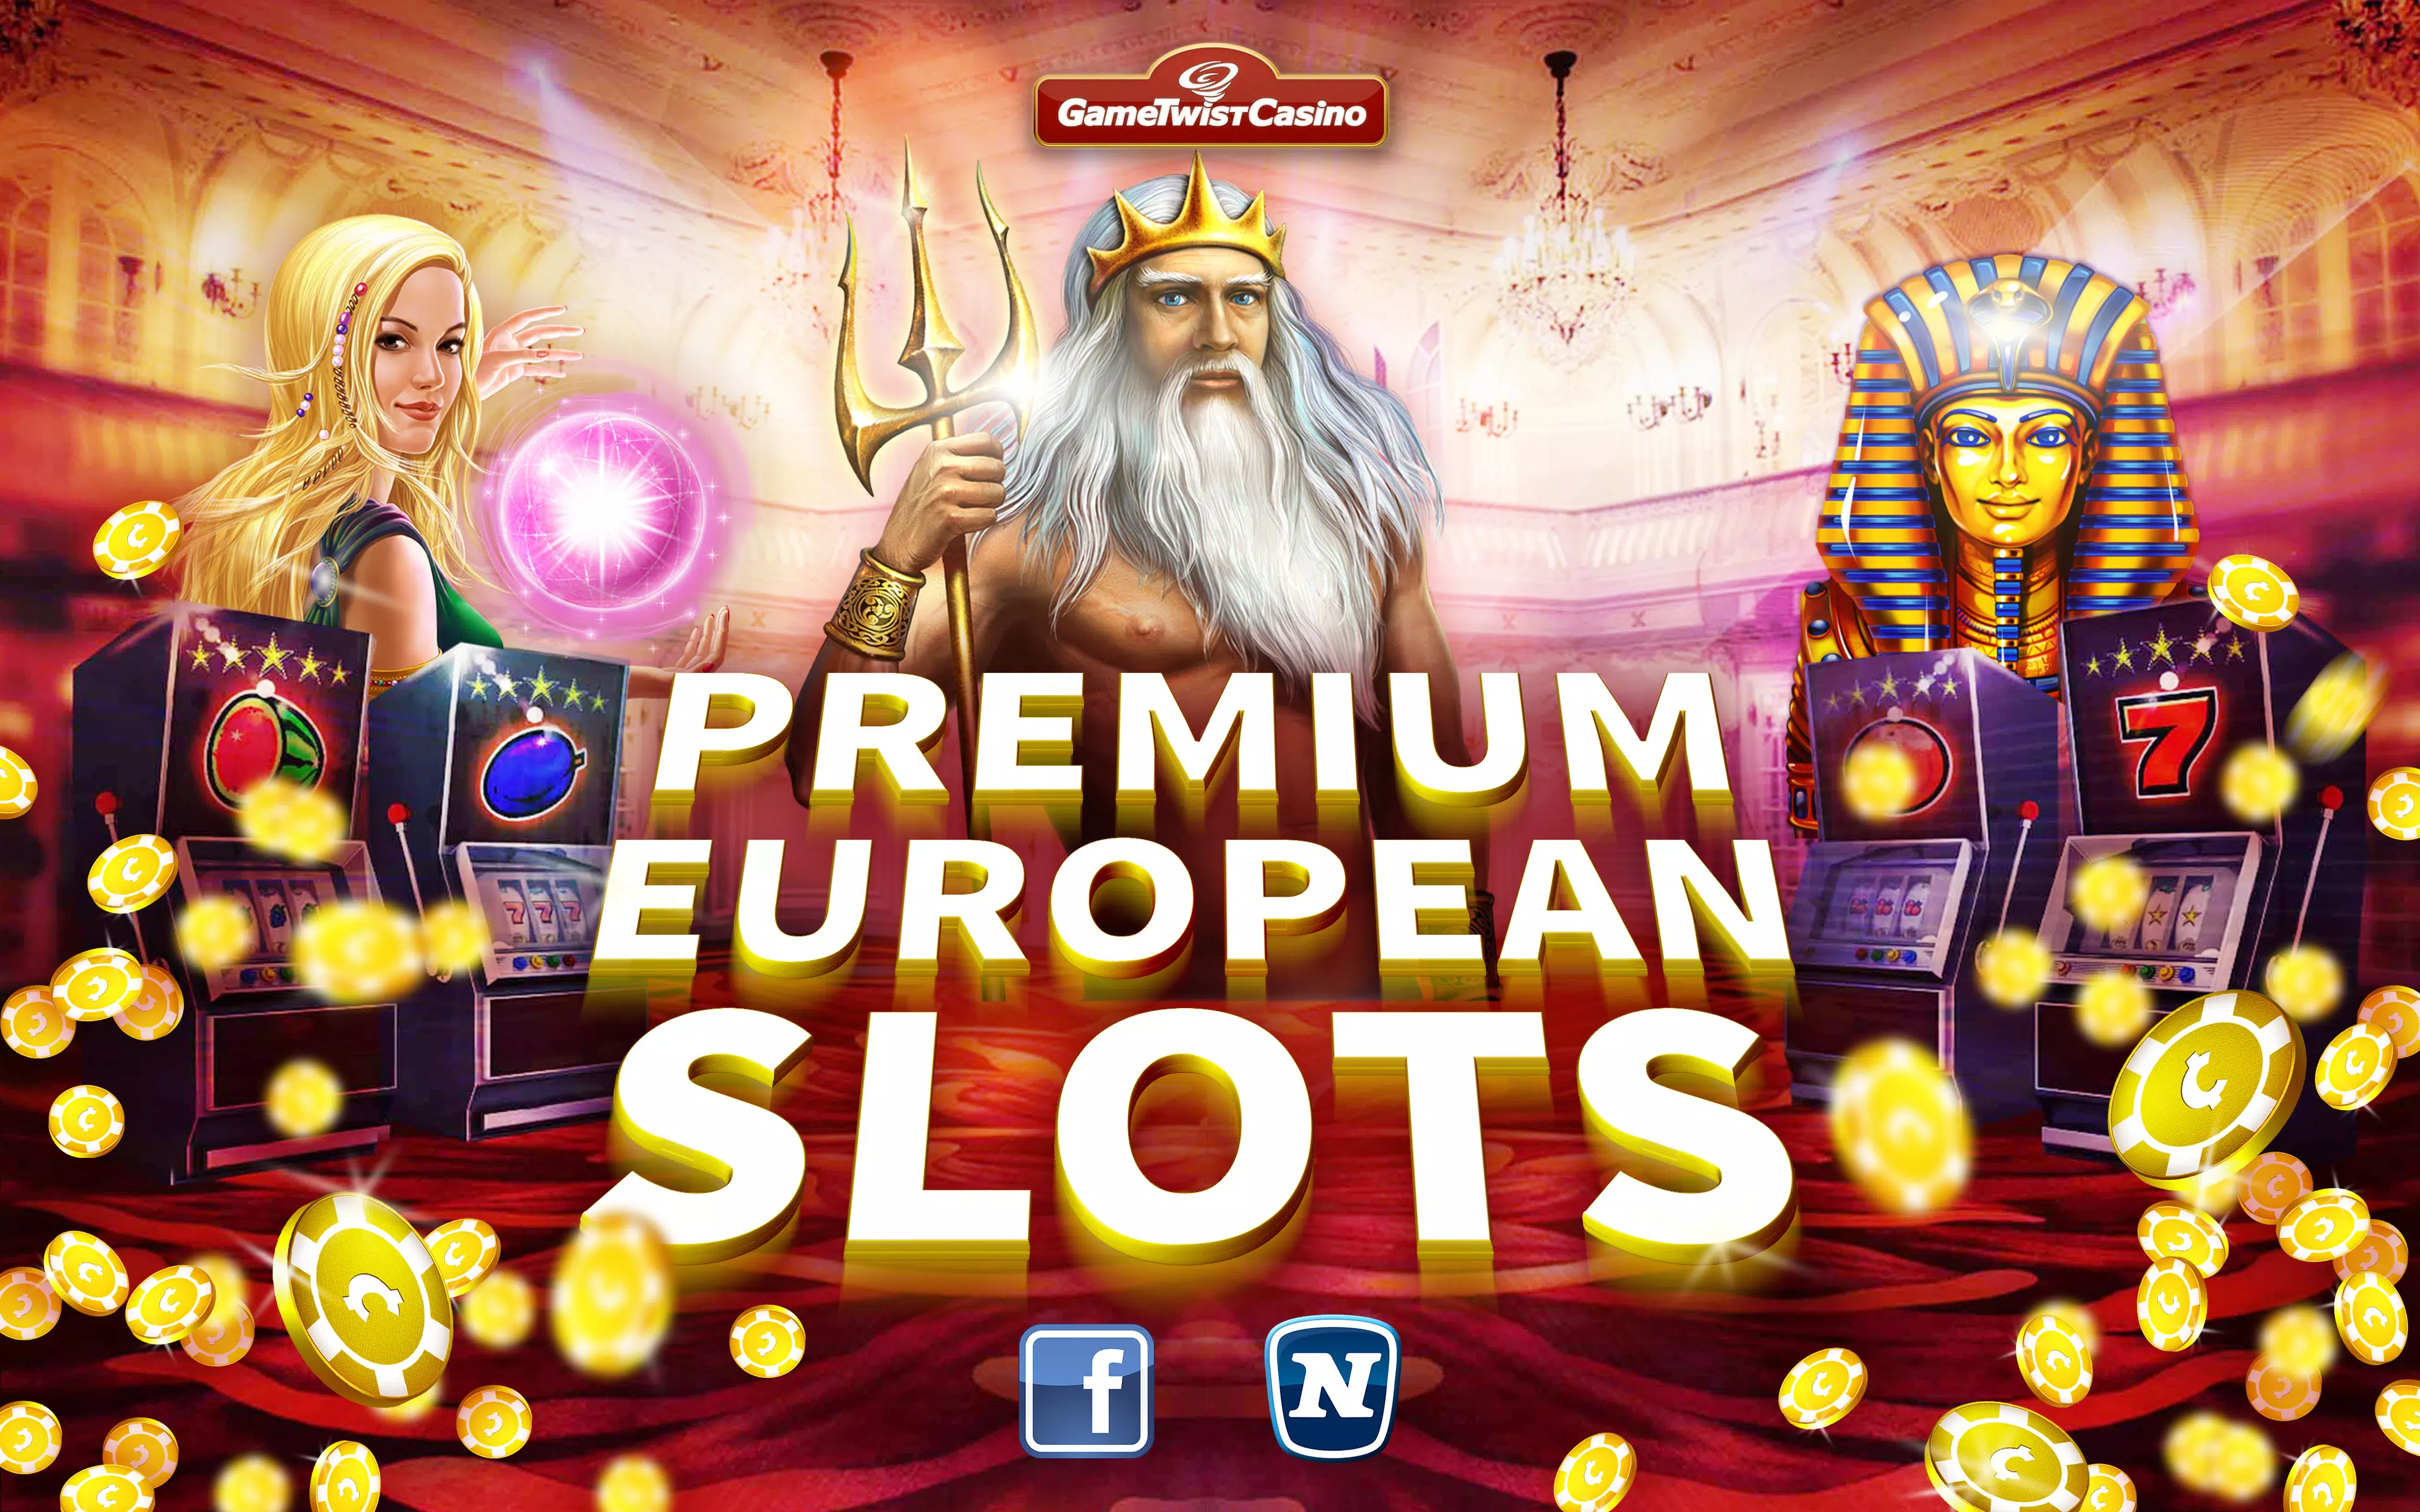 Free download GameTwist Vegas Casino Slots APK for Android